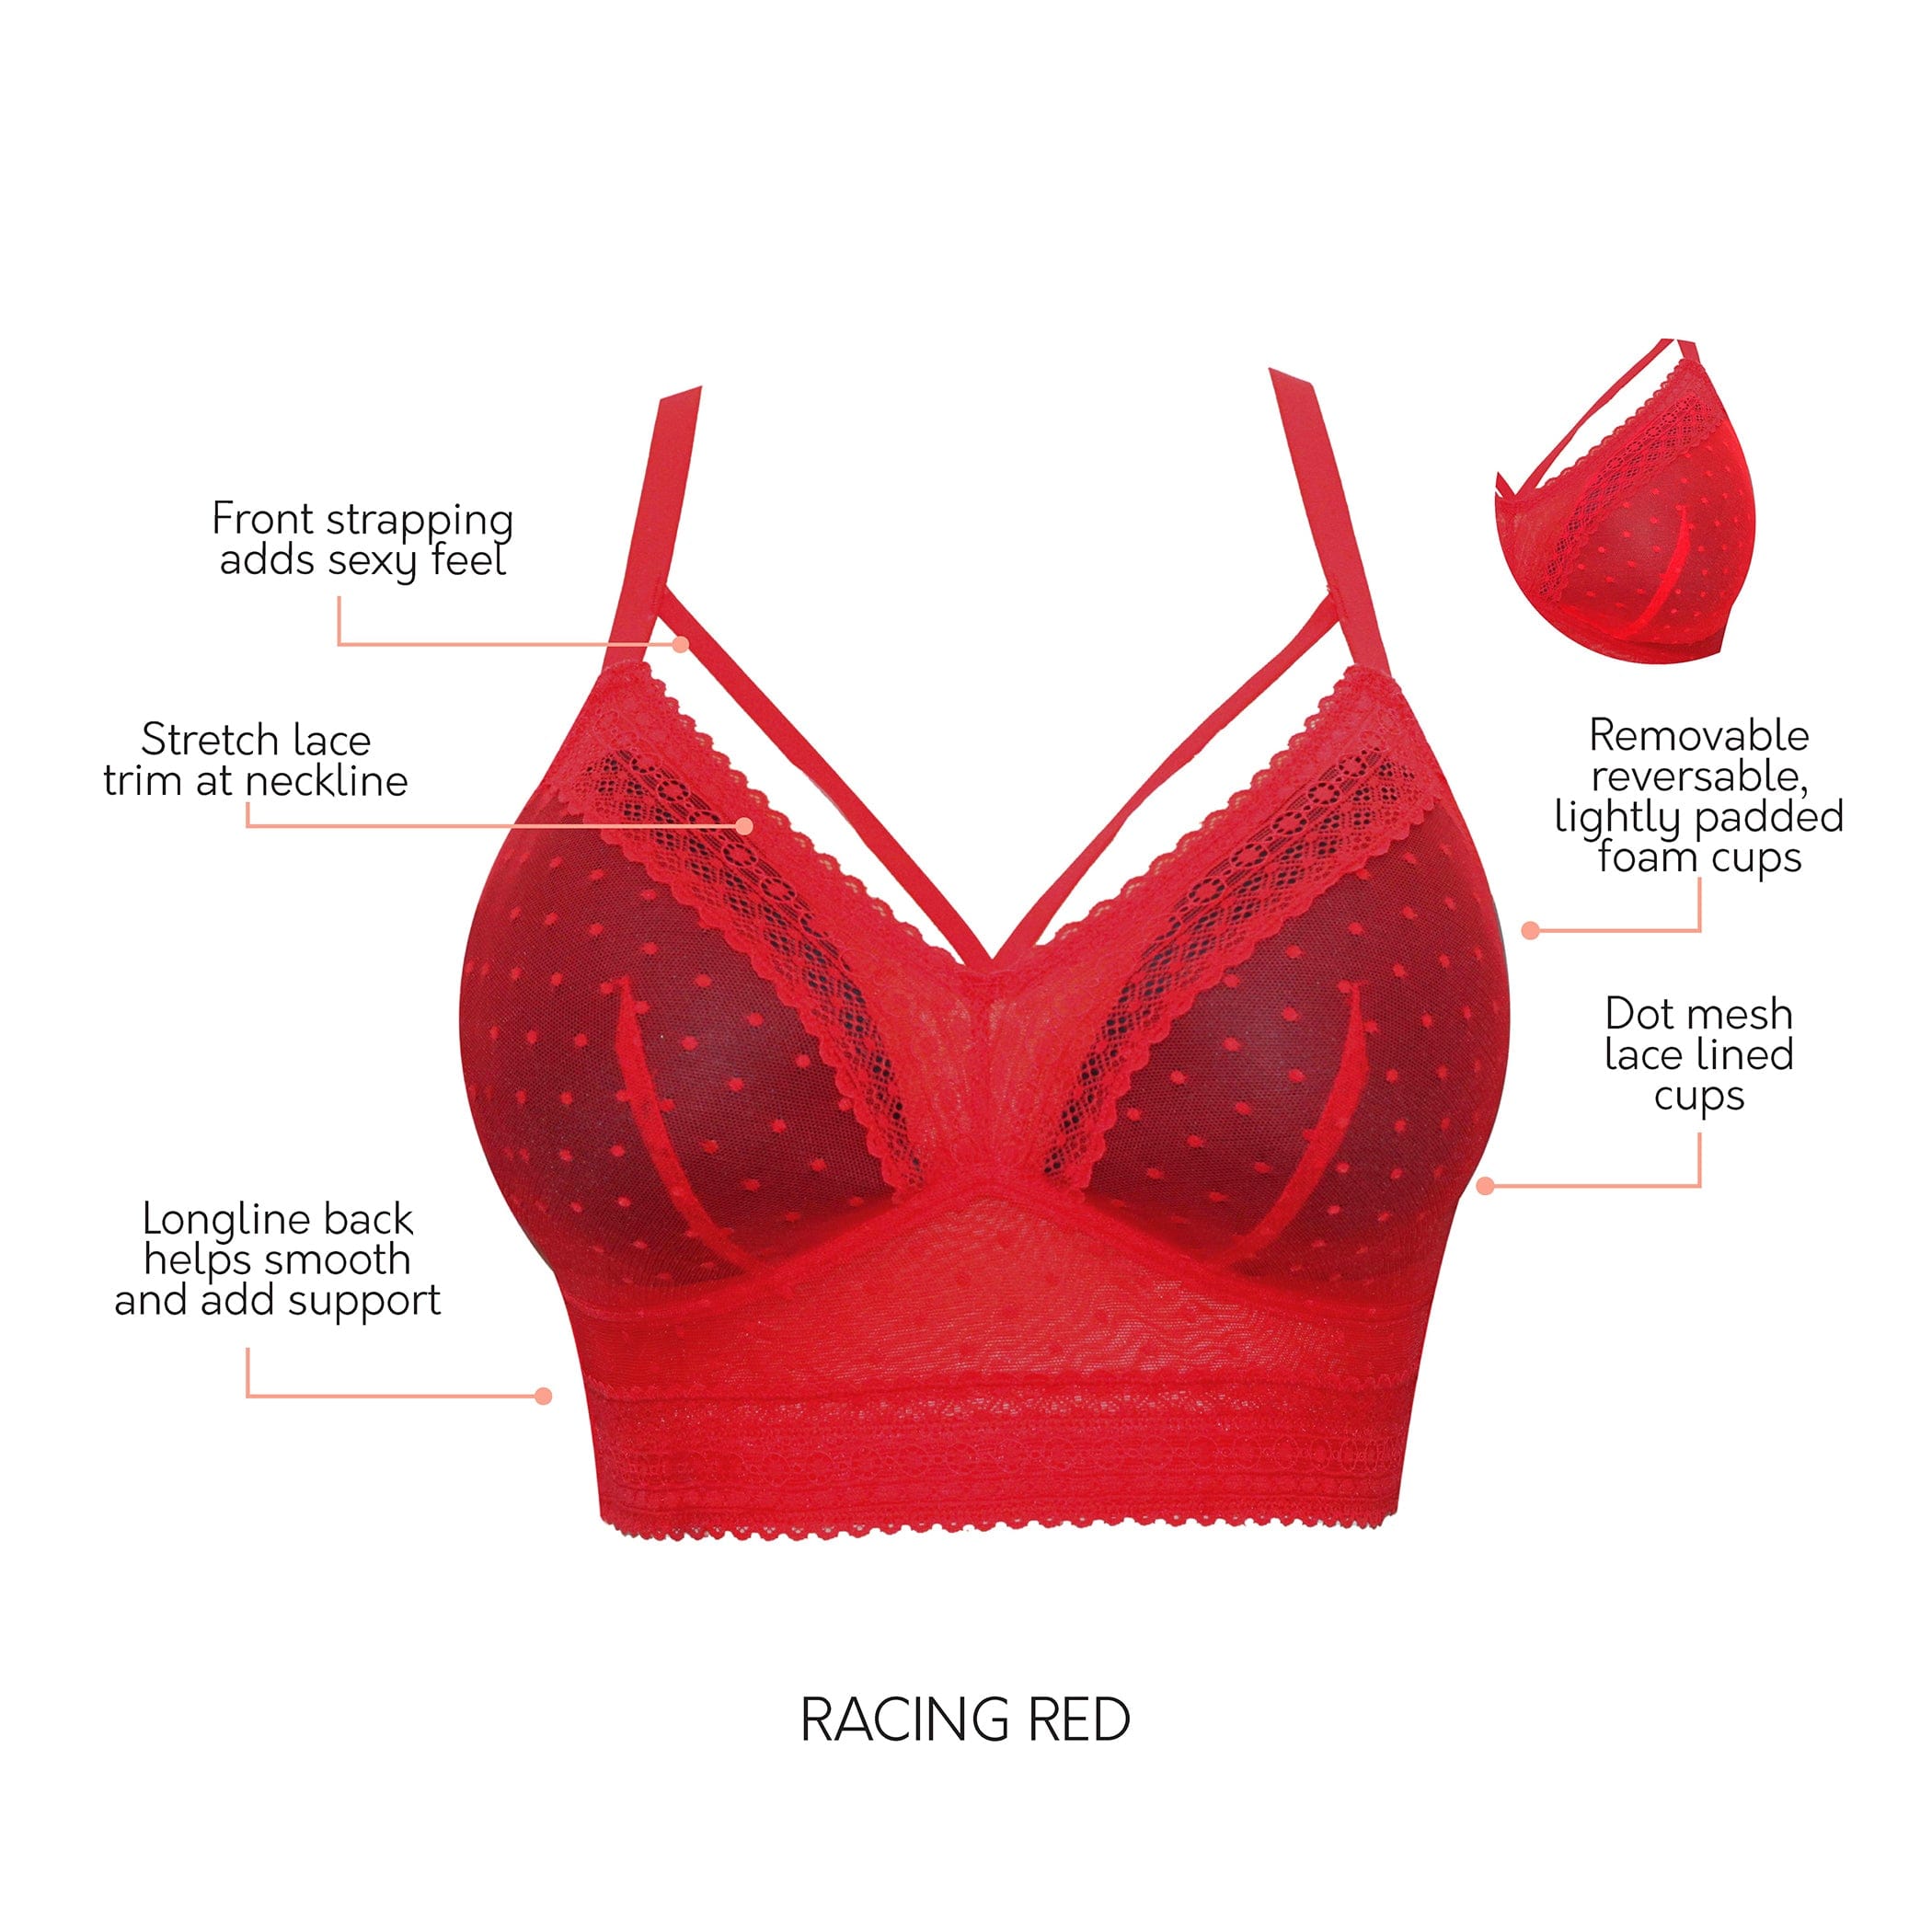 Parfait Adriana Wire-free Full Bust Lace Bralette - Racing Red - Curvy